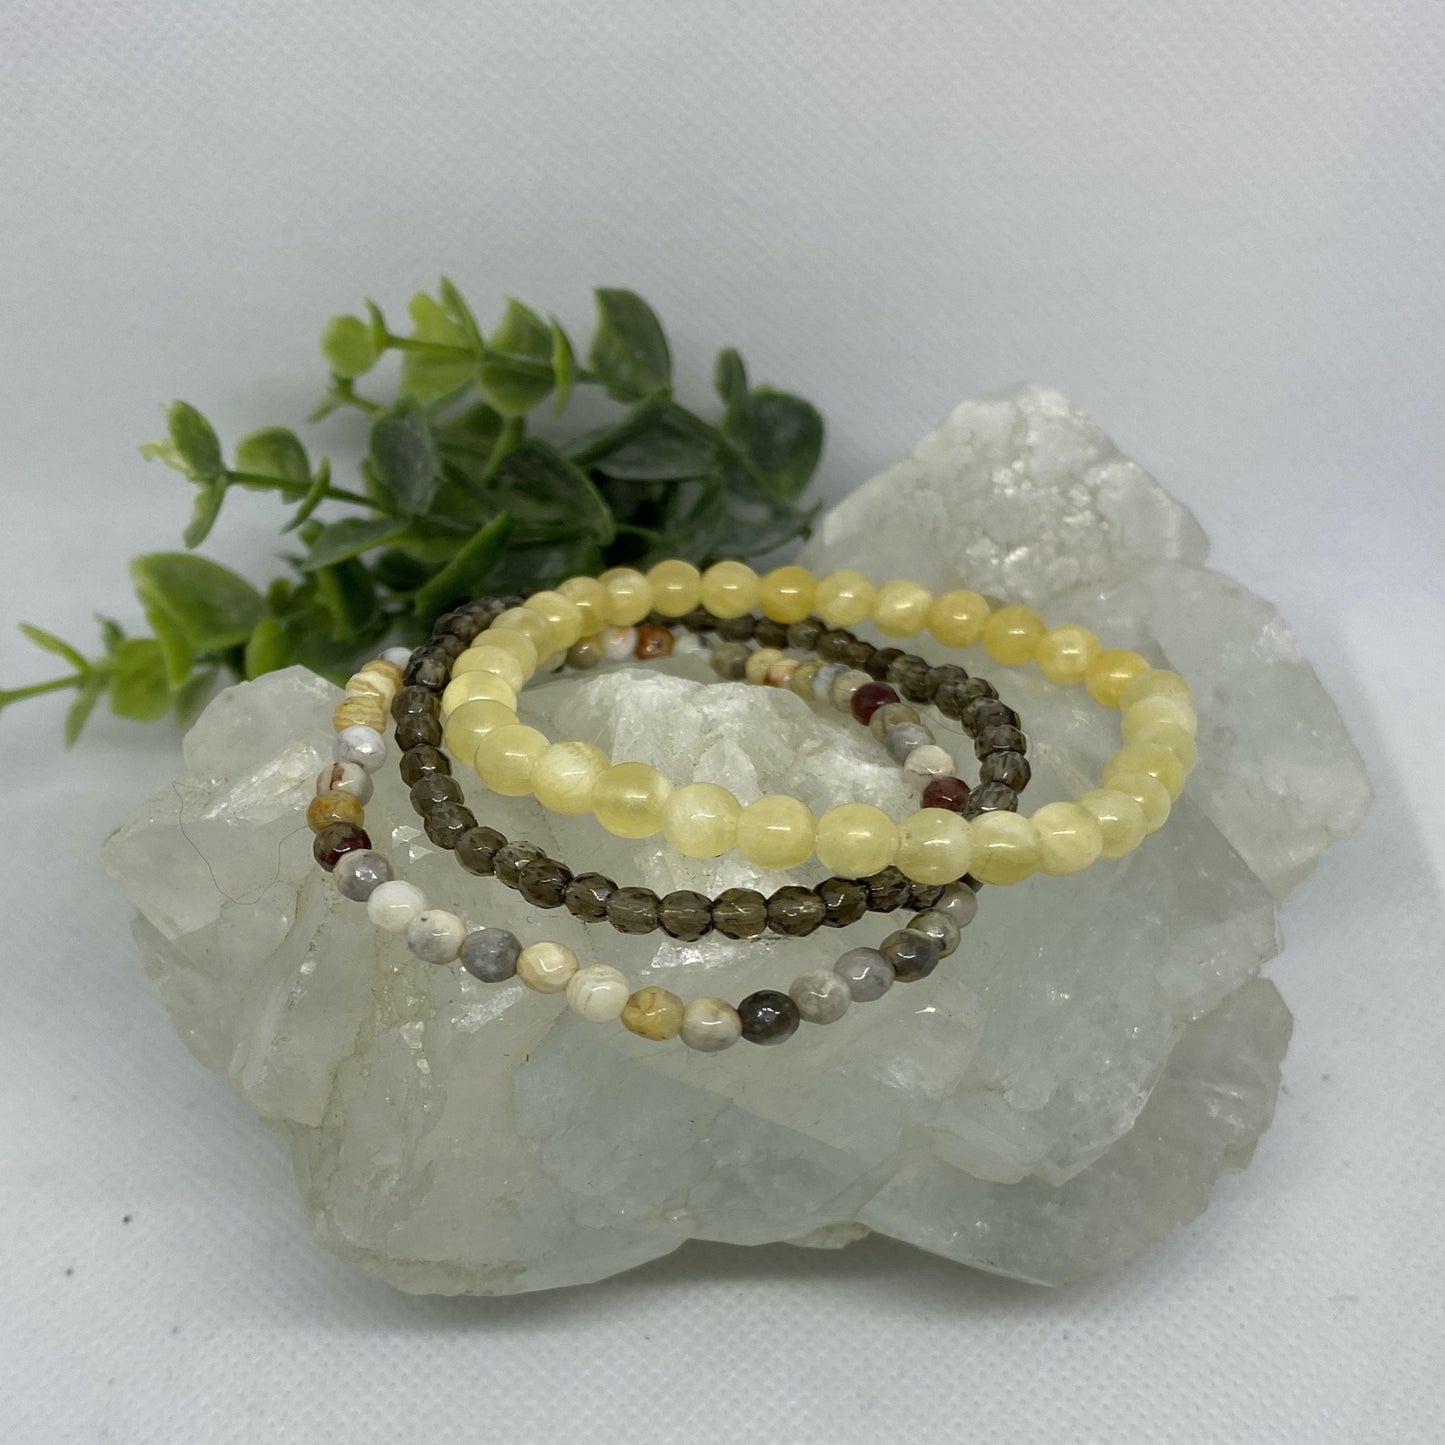 Positivity Stack: Crazy Lace Agate, Smoky Quartz, and Yellow Calcite